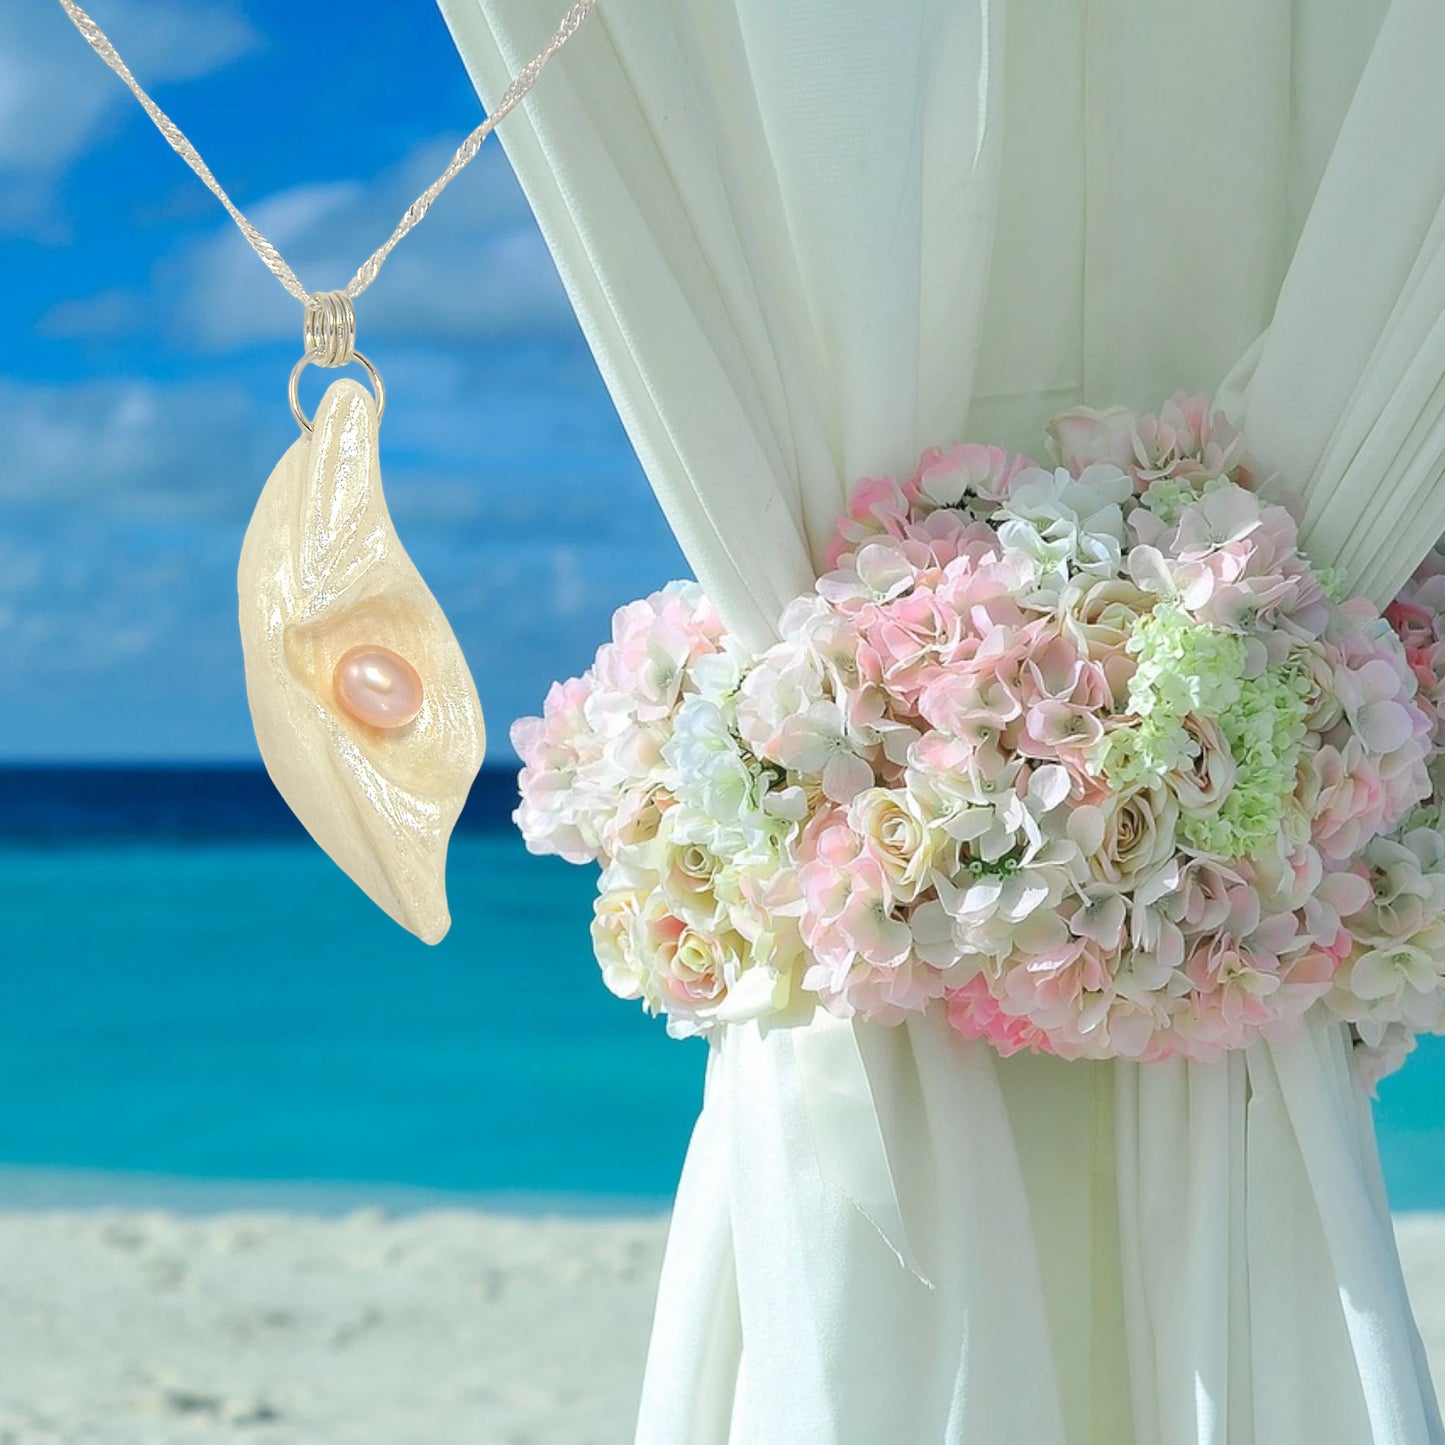 Glow natural seashell pendant with a pink freshwater pearl. The pendant hangs next to a bouquet of florals wrapped around a curtain for a beach wedding.